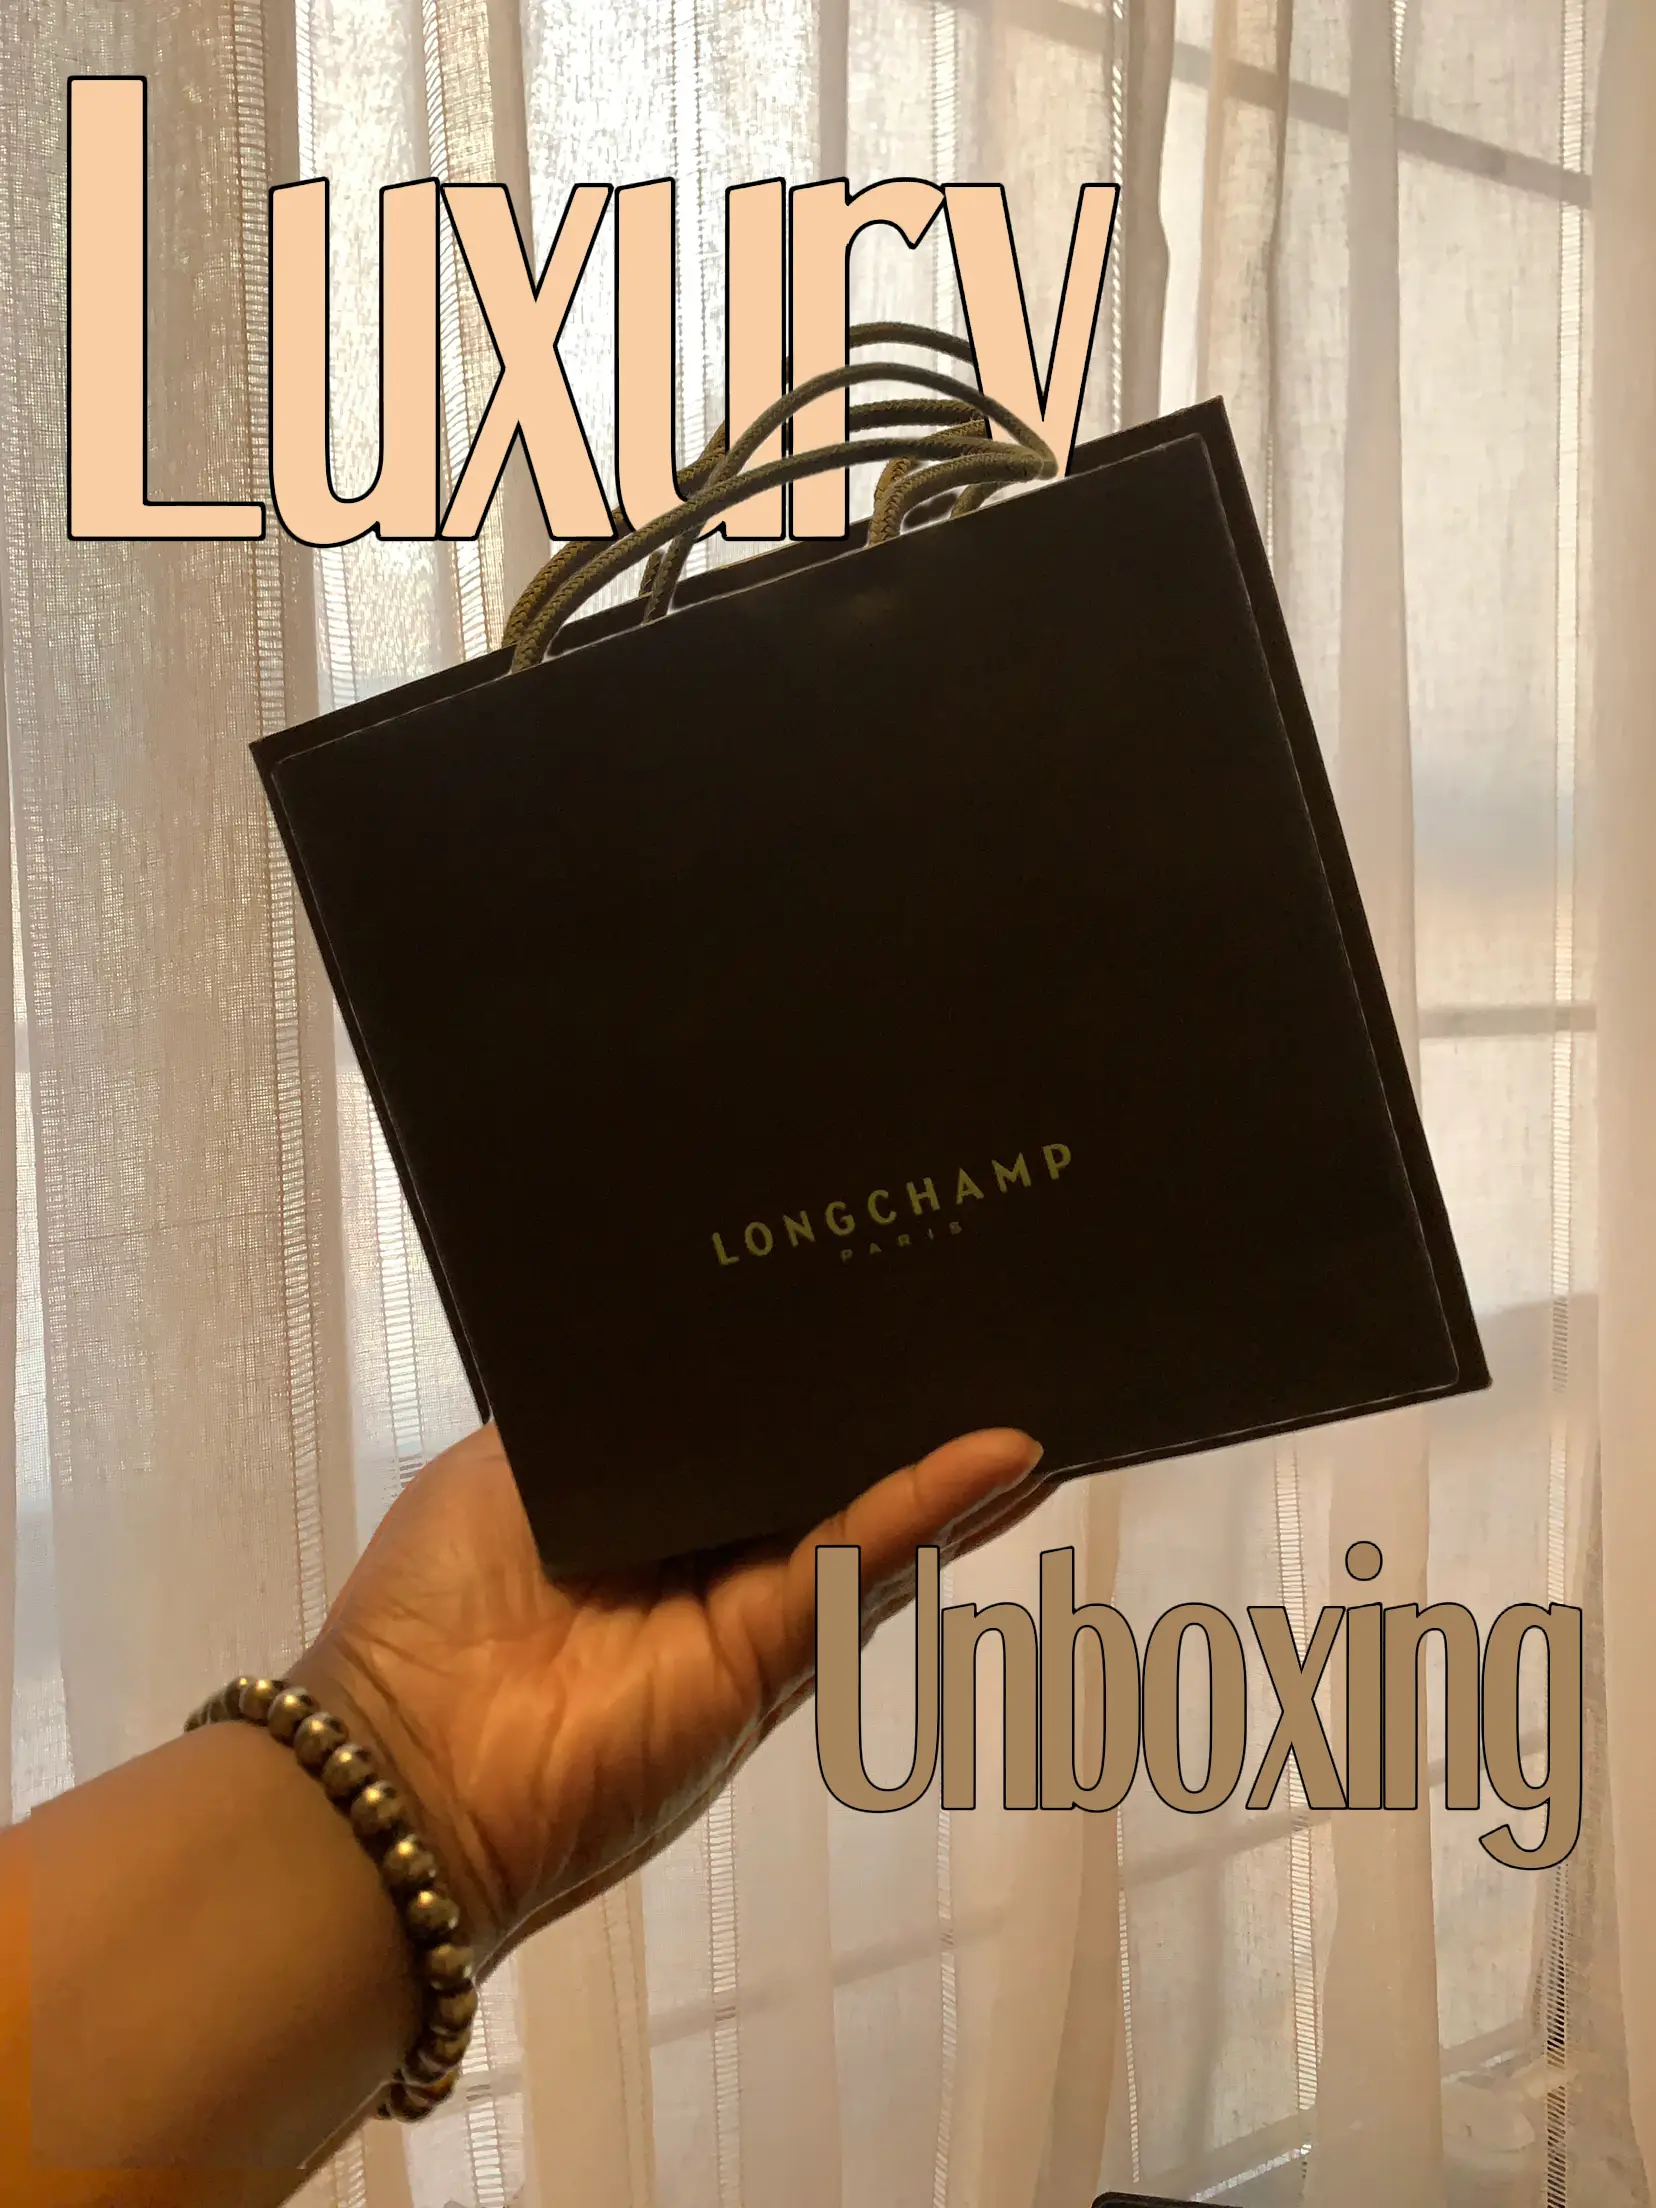 LONGCHAMP ROSEAU TOP HANDLE, UNBOXING AND REVIEW